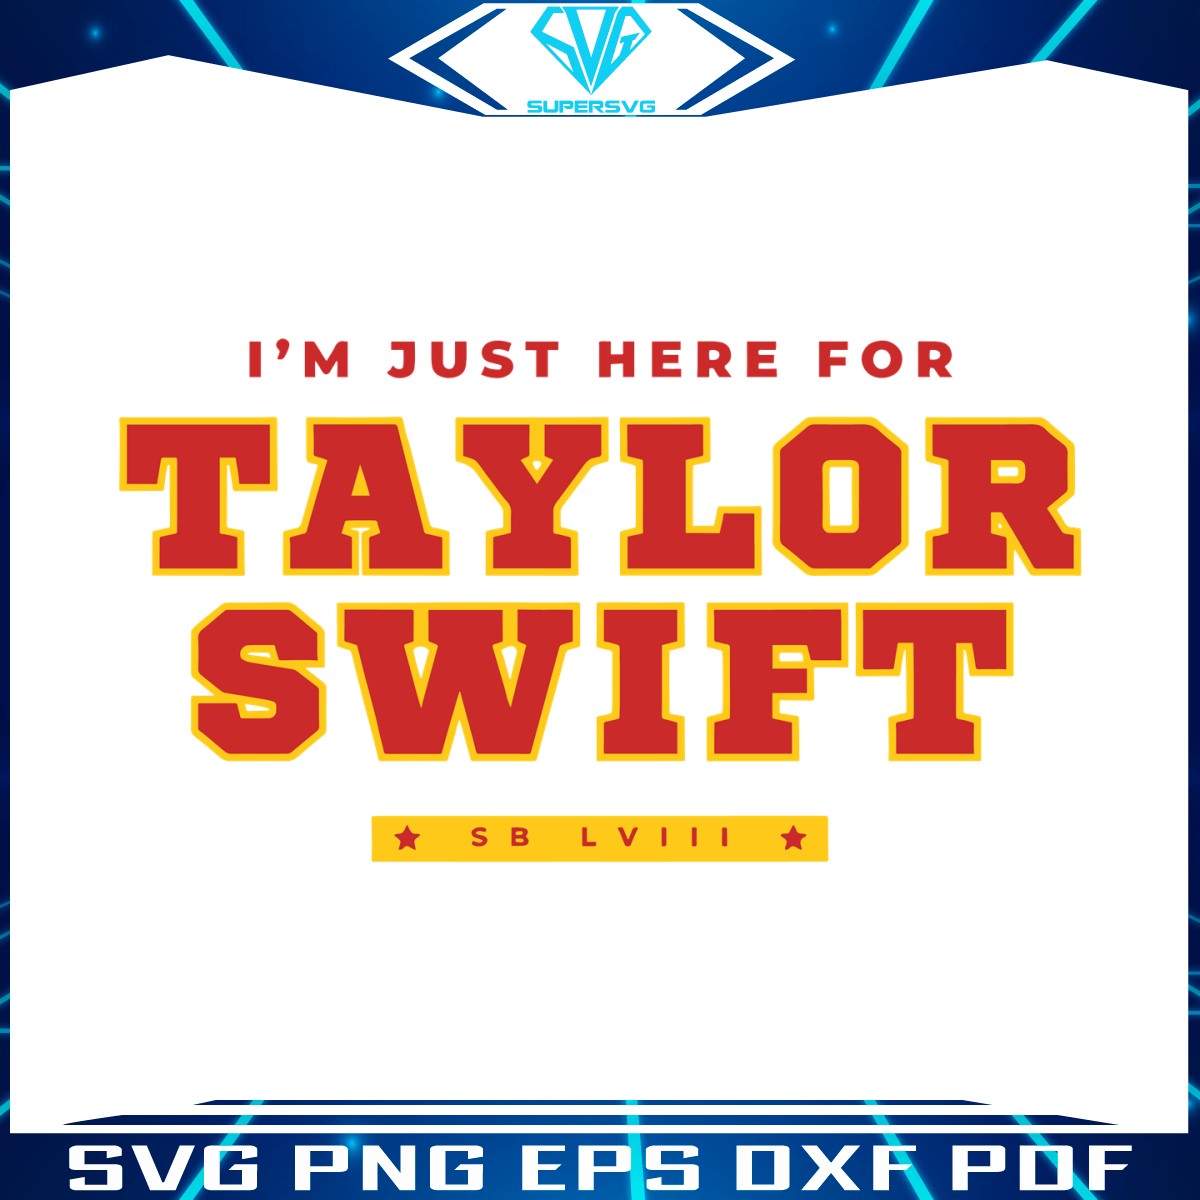 im-just-here-for-taylor-swift-lviii-svg